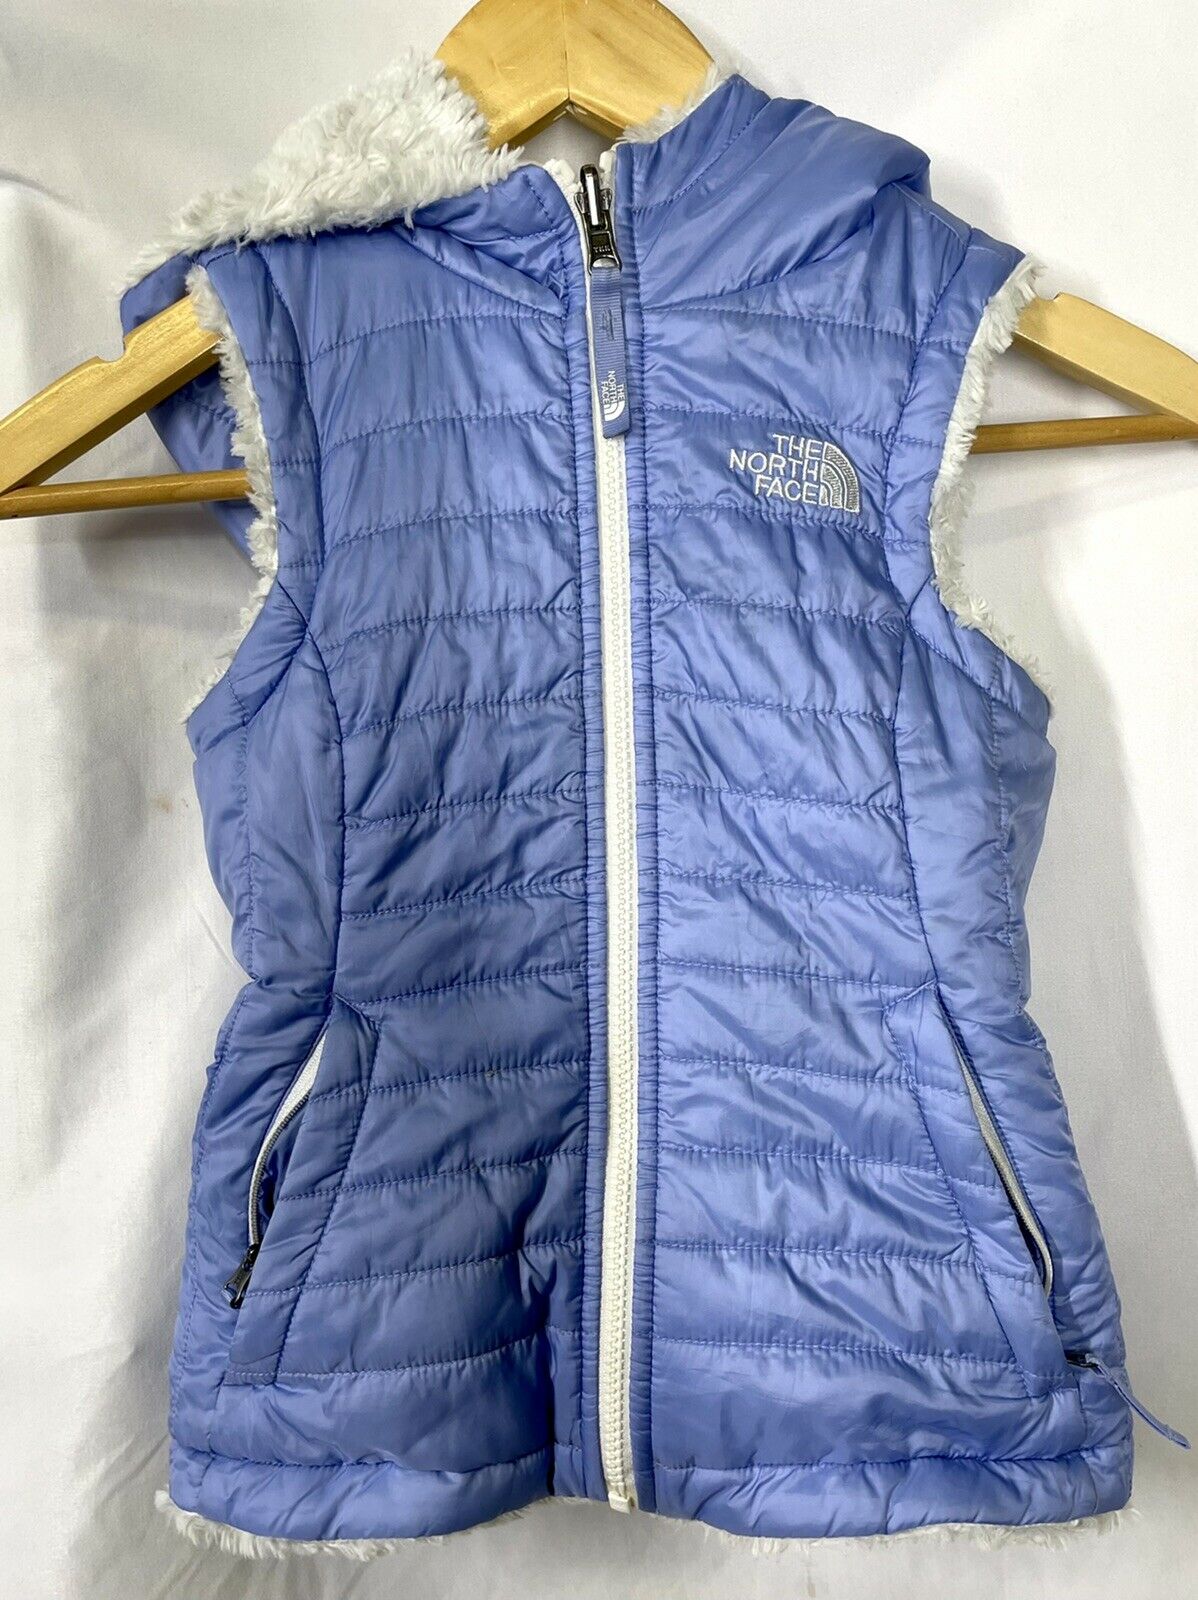 The North Face Girls 6 Xs Reversible Vest Blue & White